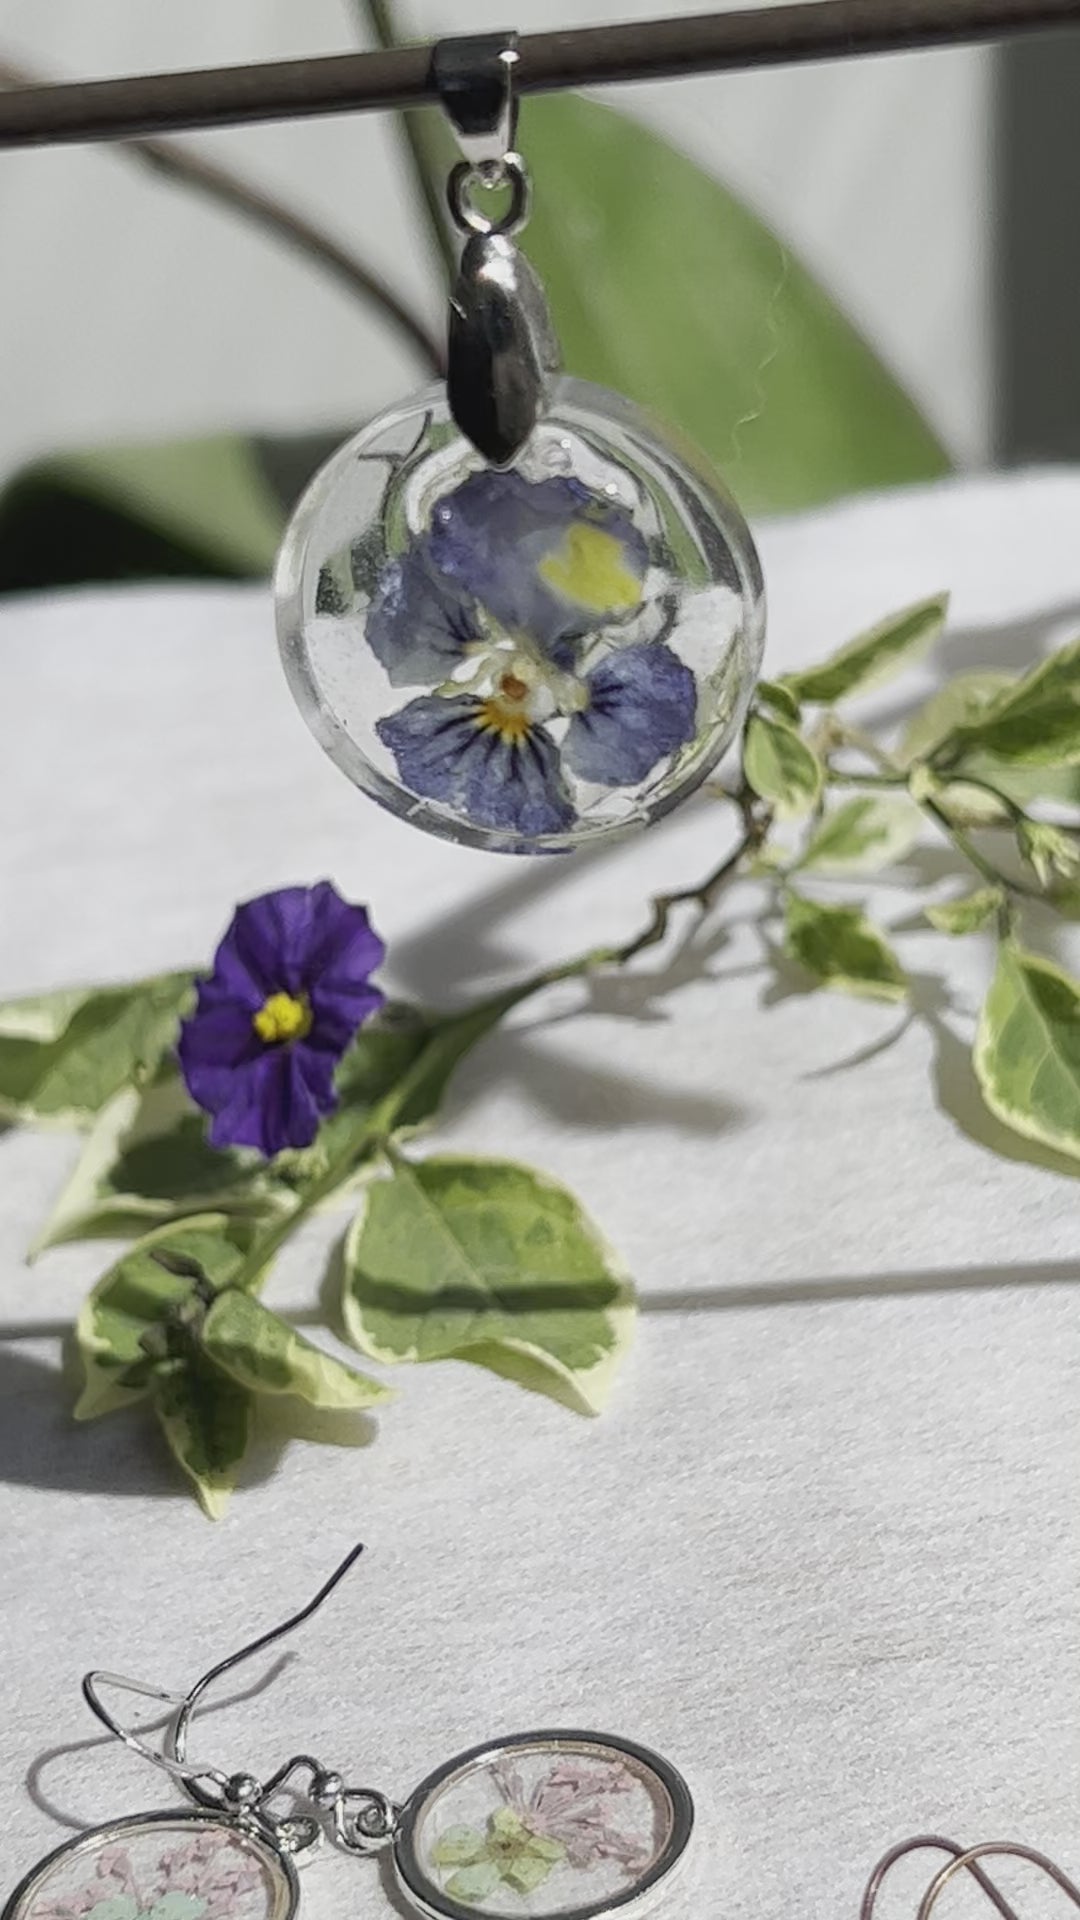 real tiny blue pansy flower in resin necklace perfect gift